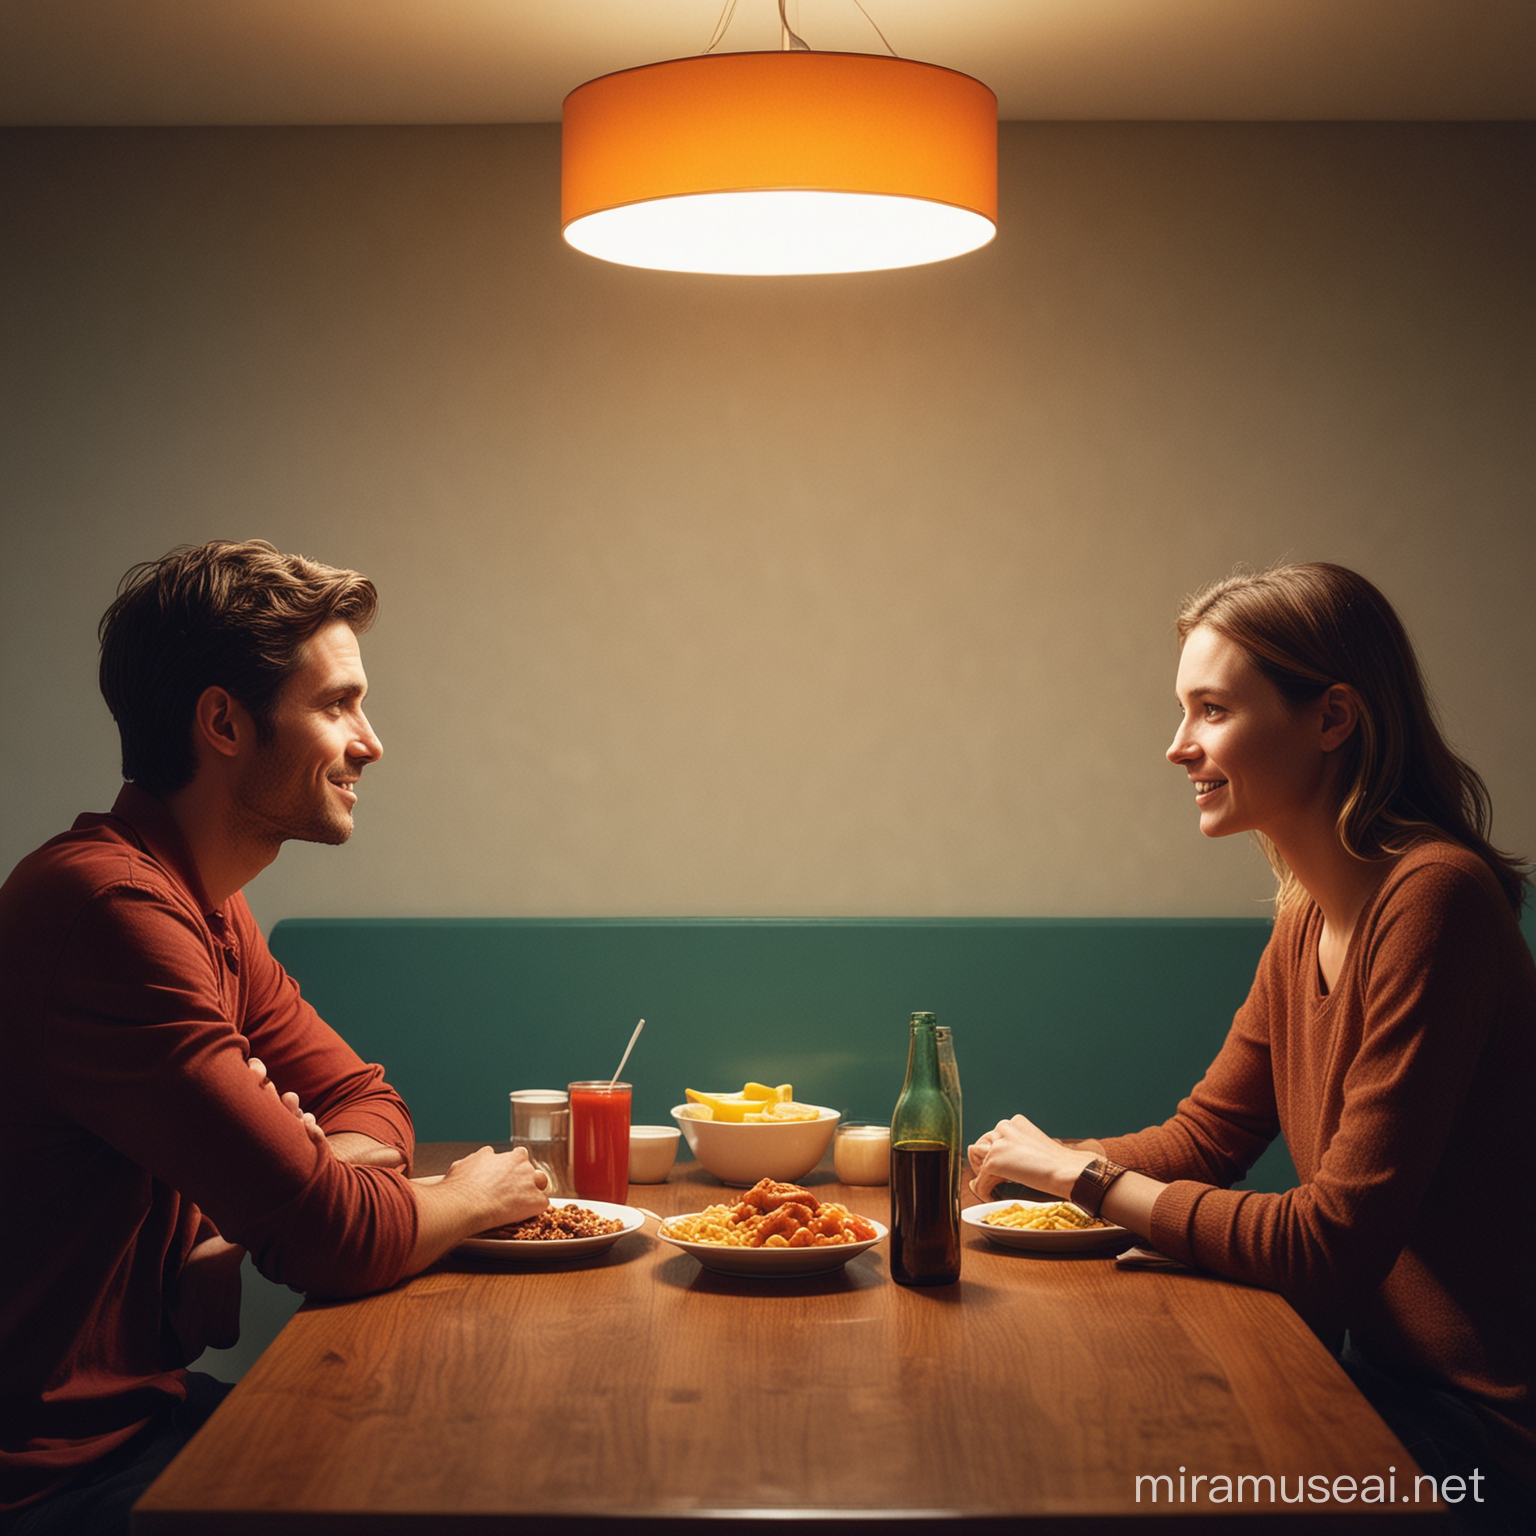 A couple of People in a room, respectfully conversing with one another.

Background: Plain Background, sharp lights, sharp shadows, sharp highlights. Vibrant food colors.

Mood: Ethical, respectful, moderate.